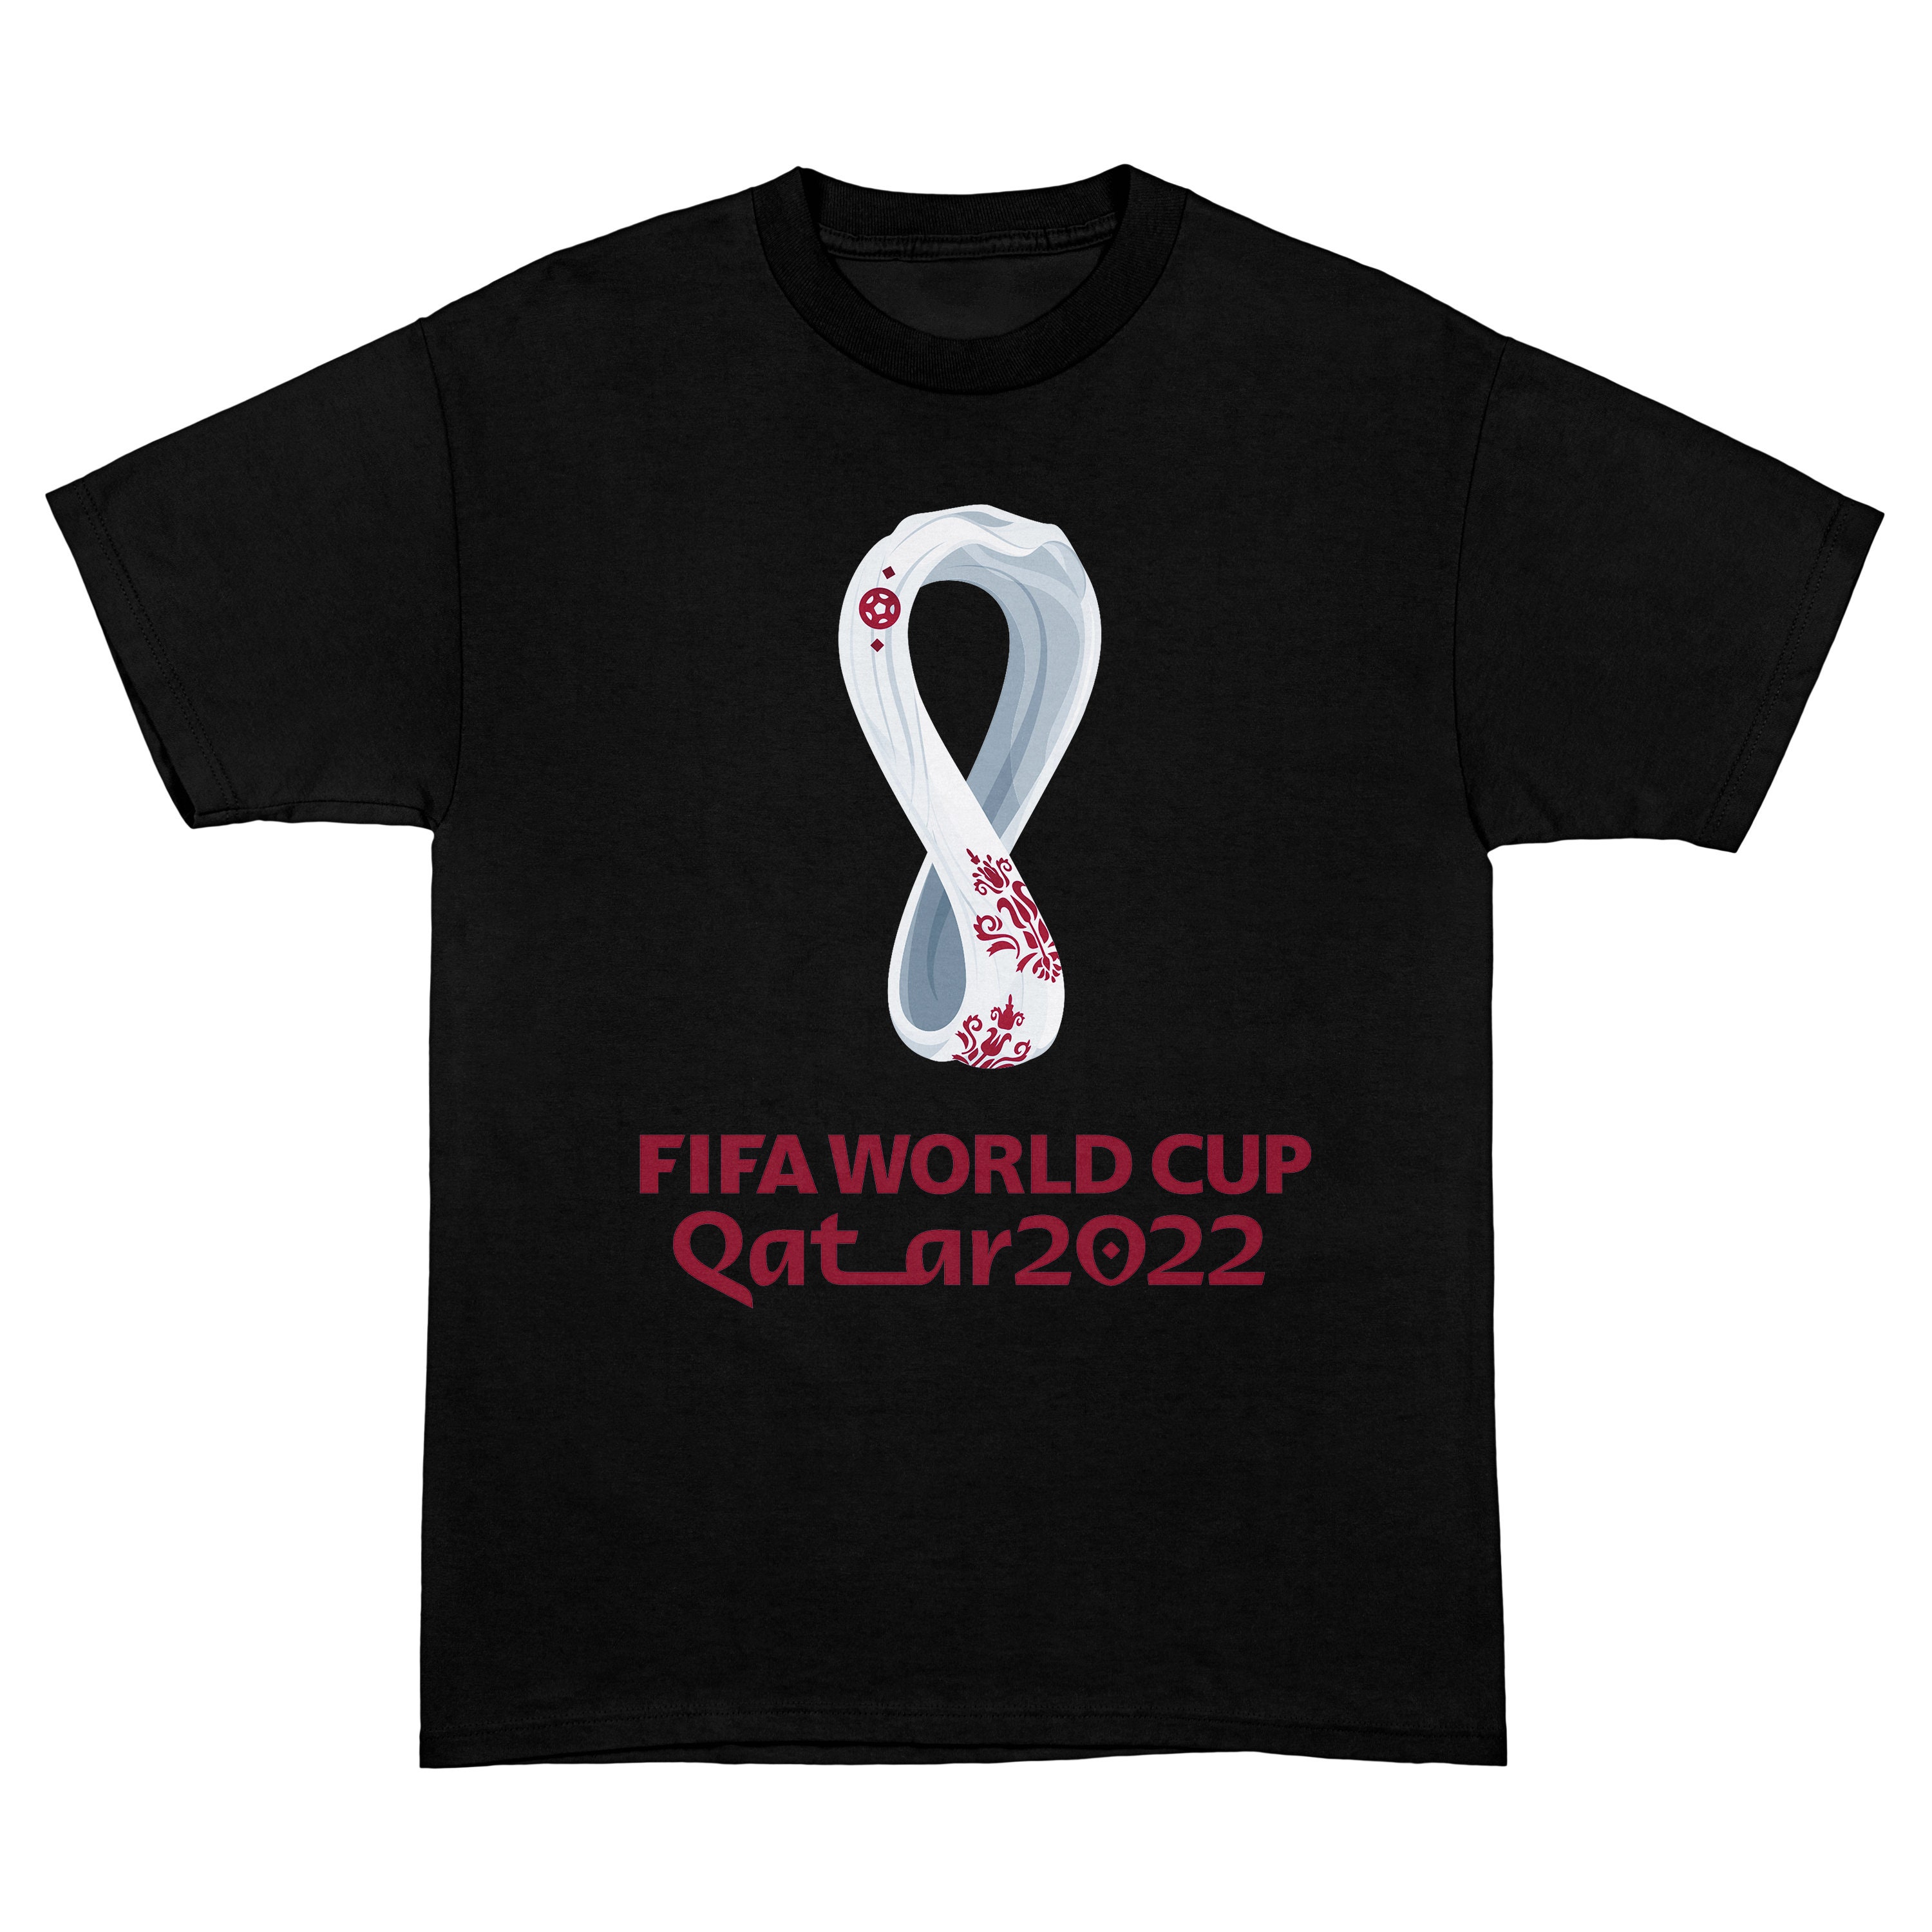 Fifa World Cup Qatar 2022, Qatar World Cup, Fifa World Cup T Shirt